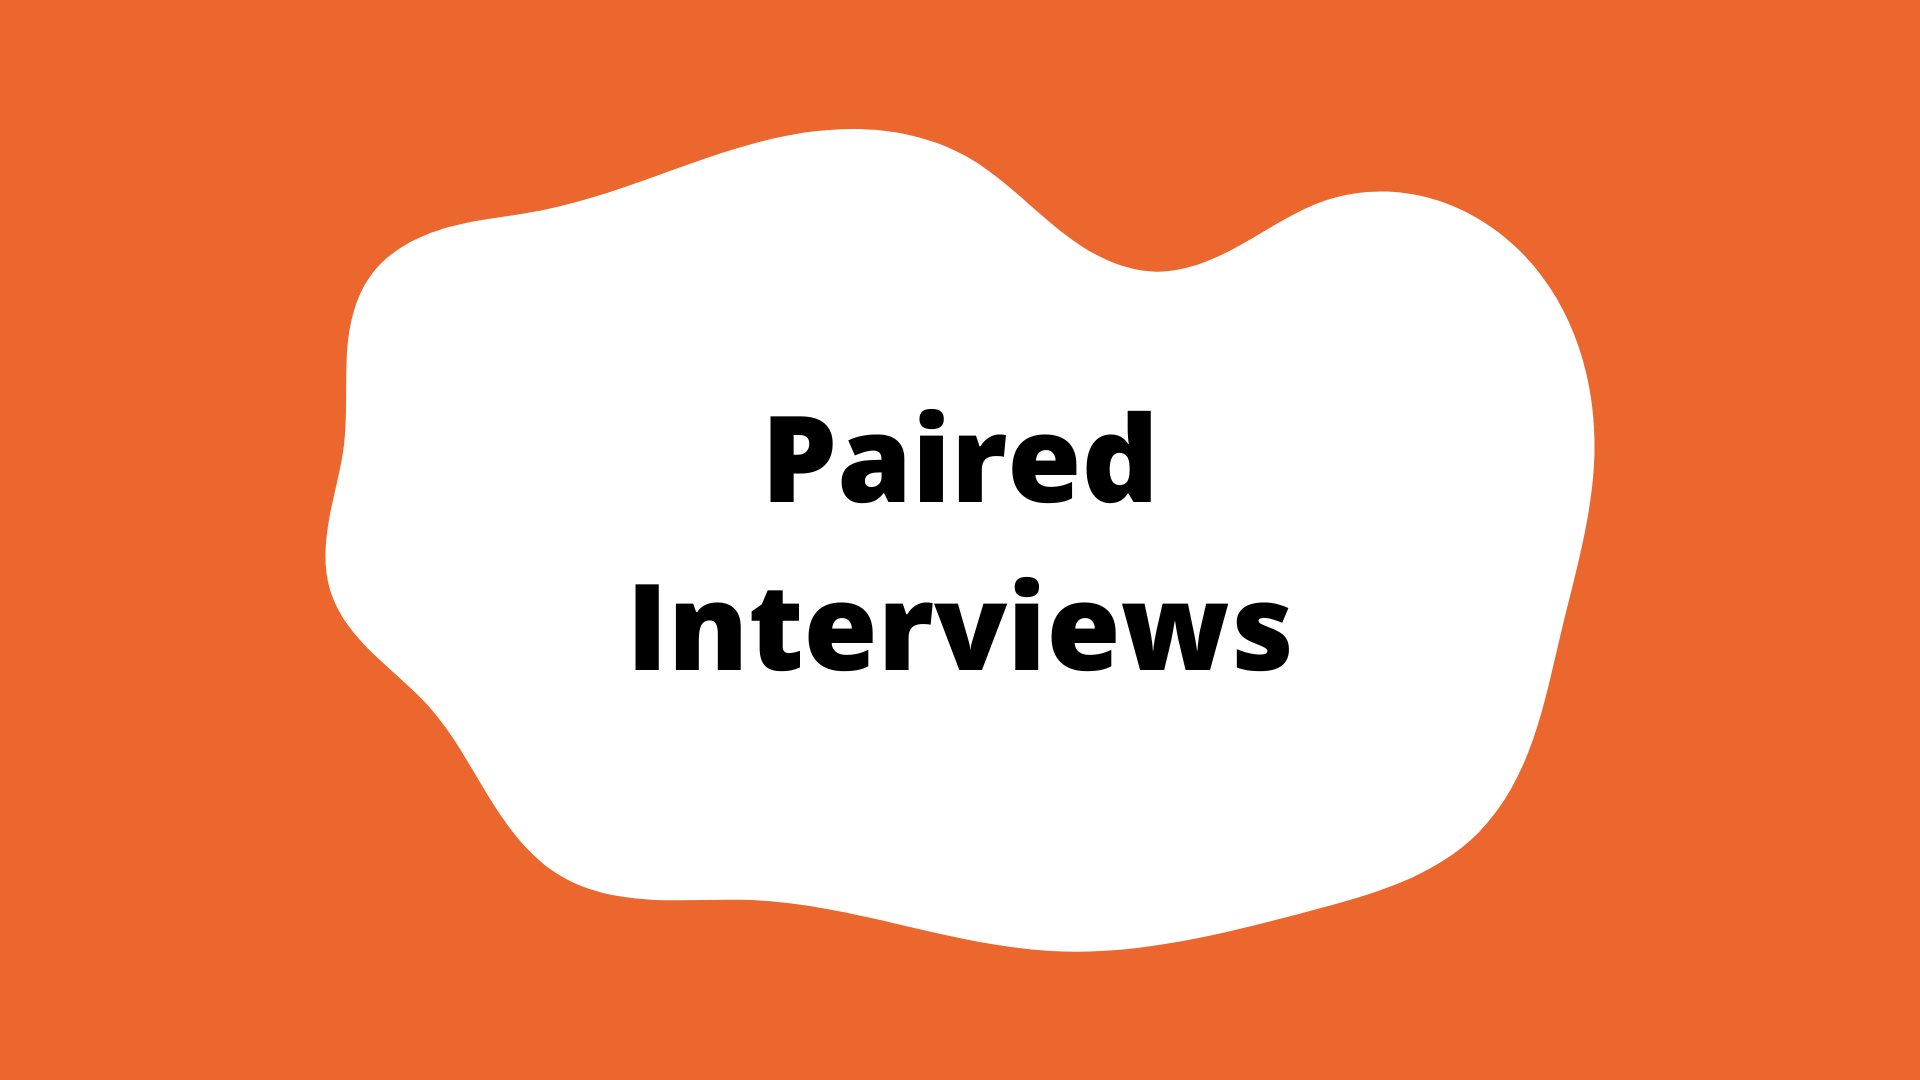 "paired interviews" activity button. An orange square with a white blob in the center. The title is in the blob.